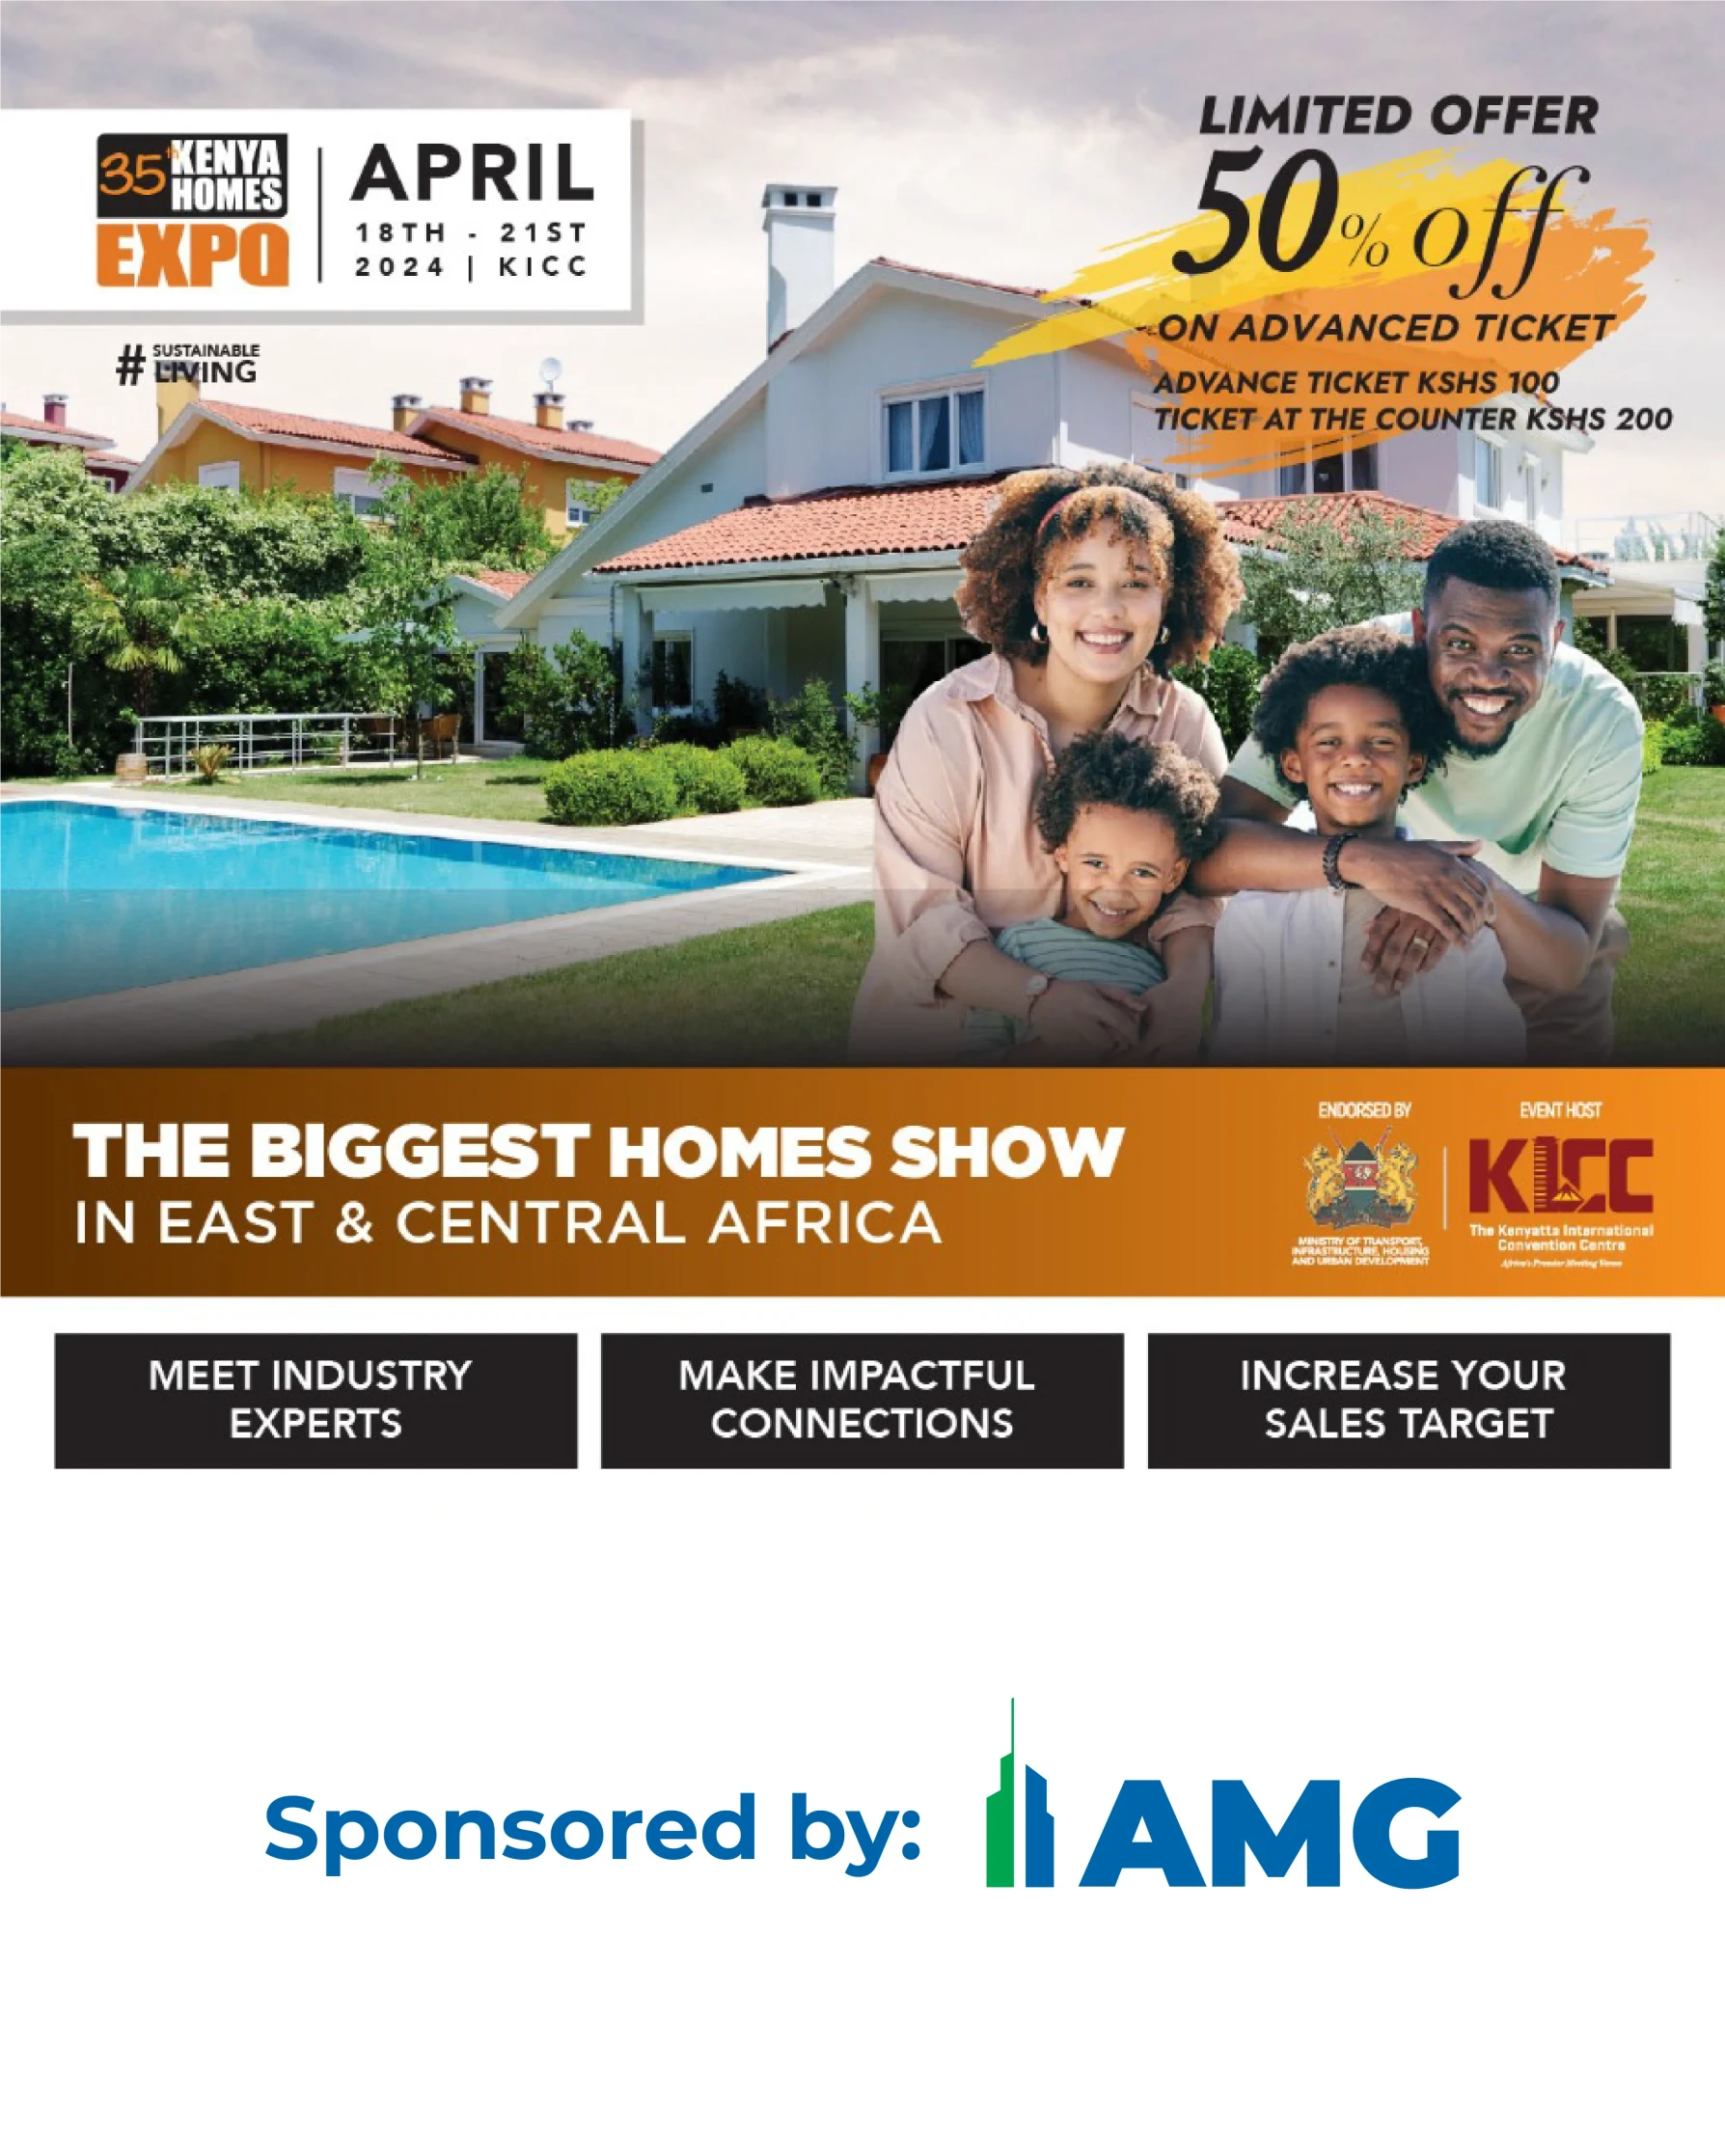 welcome-to-the-kenya-homes-expo-2024-where-amg-realtors-will-be-showcasing-their-amazing-land-investment-opportunities-in-kenya